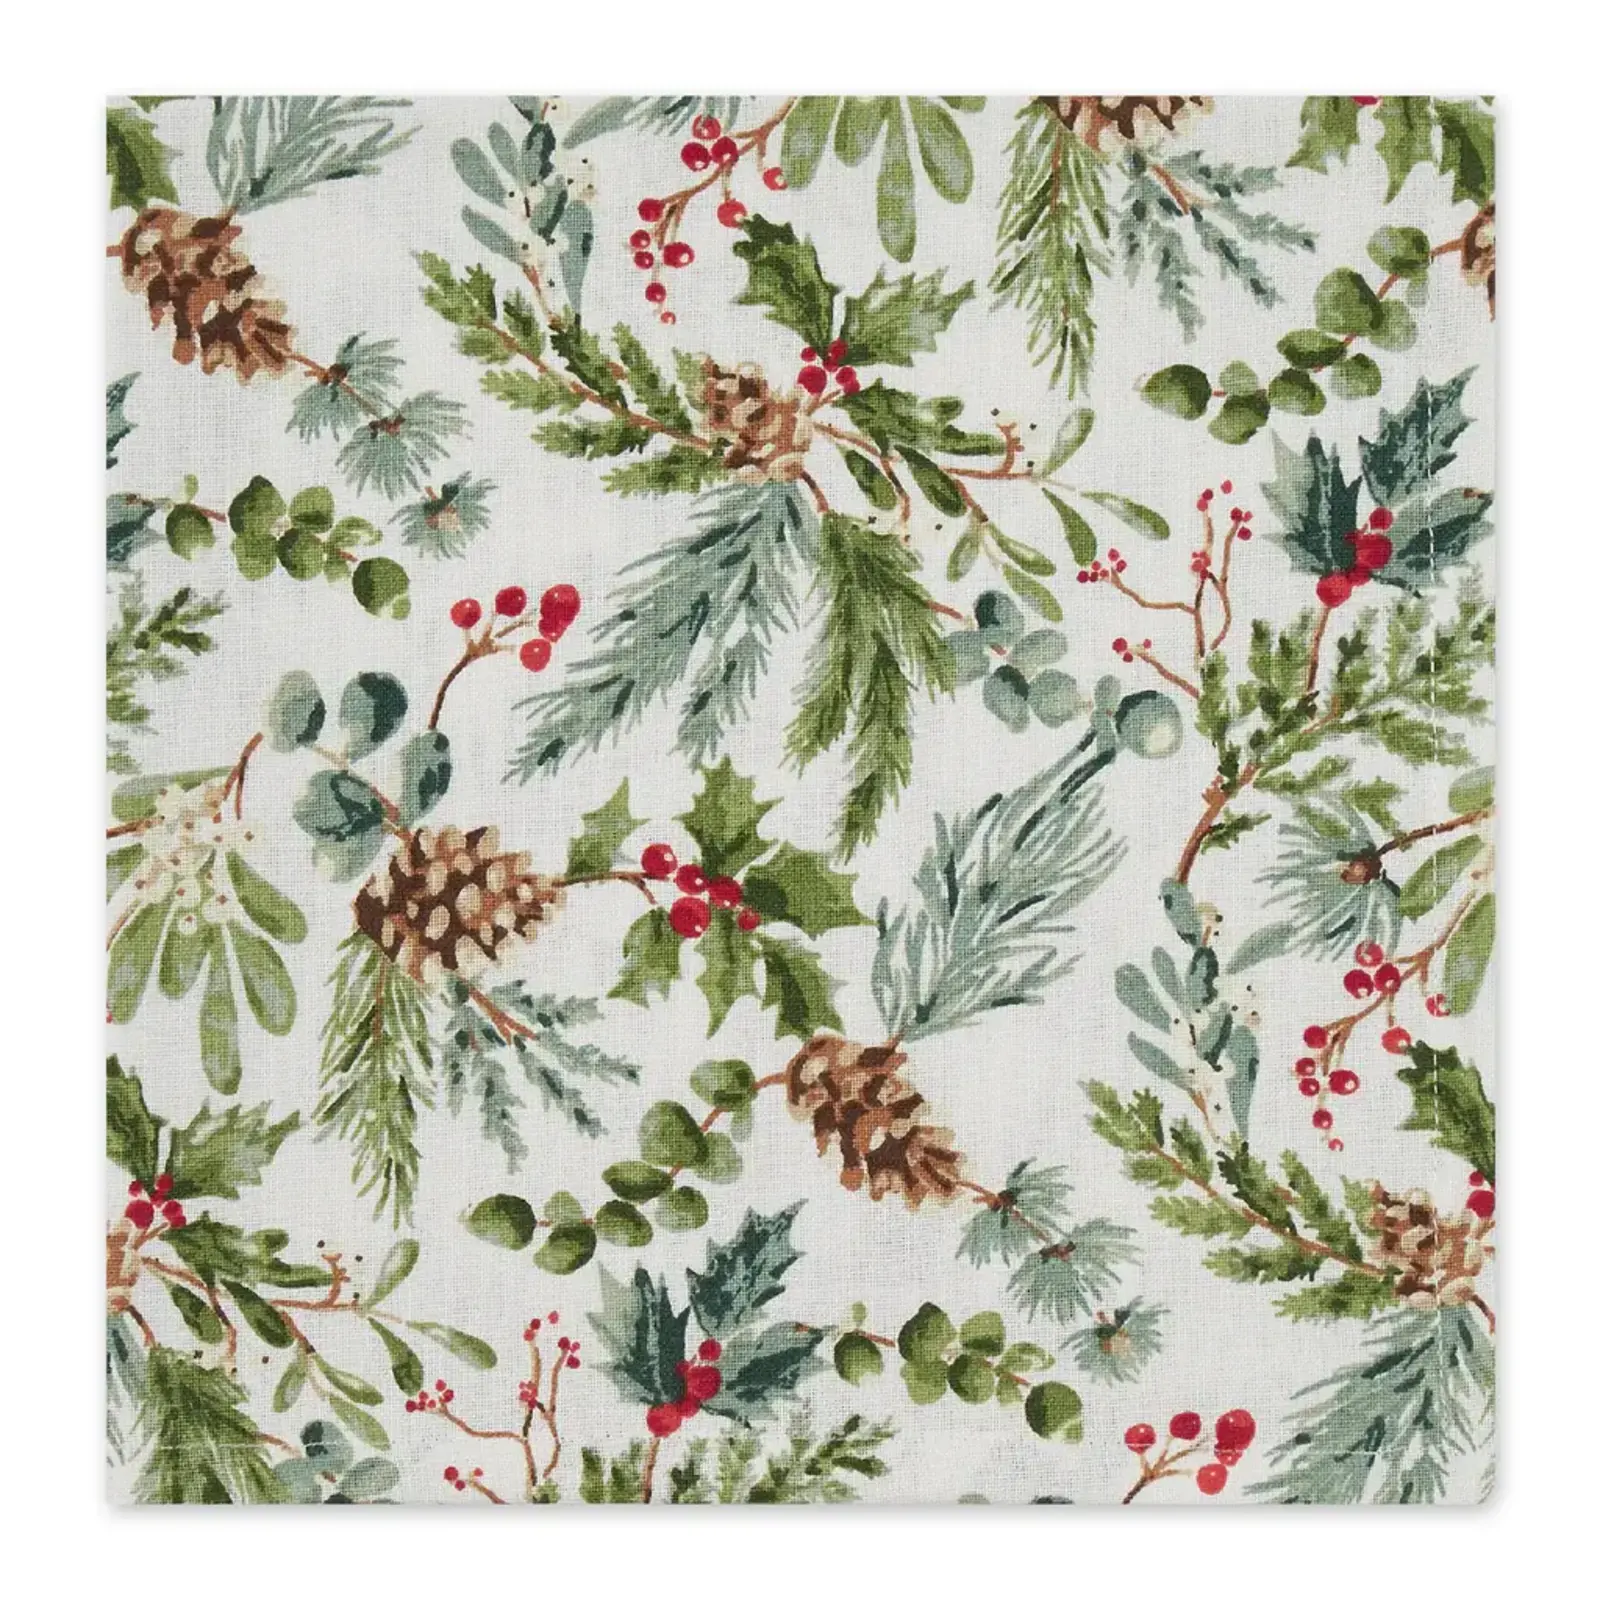 Design Imports DII Holiday Sprigs Printed Napkin 754839 loading=